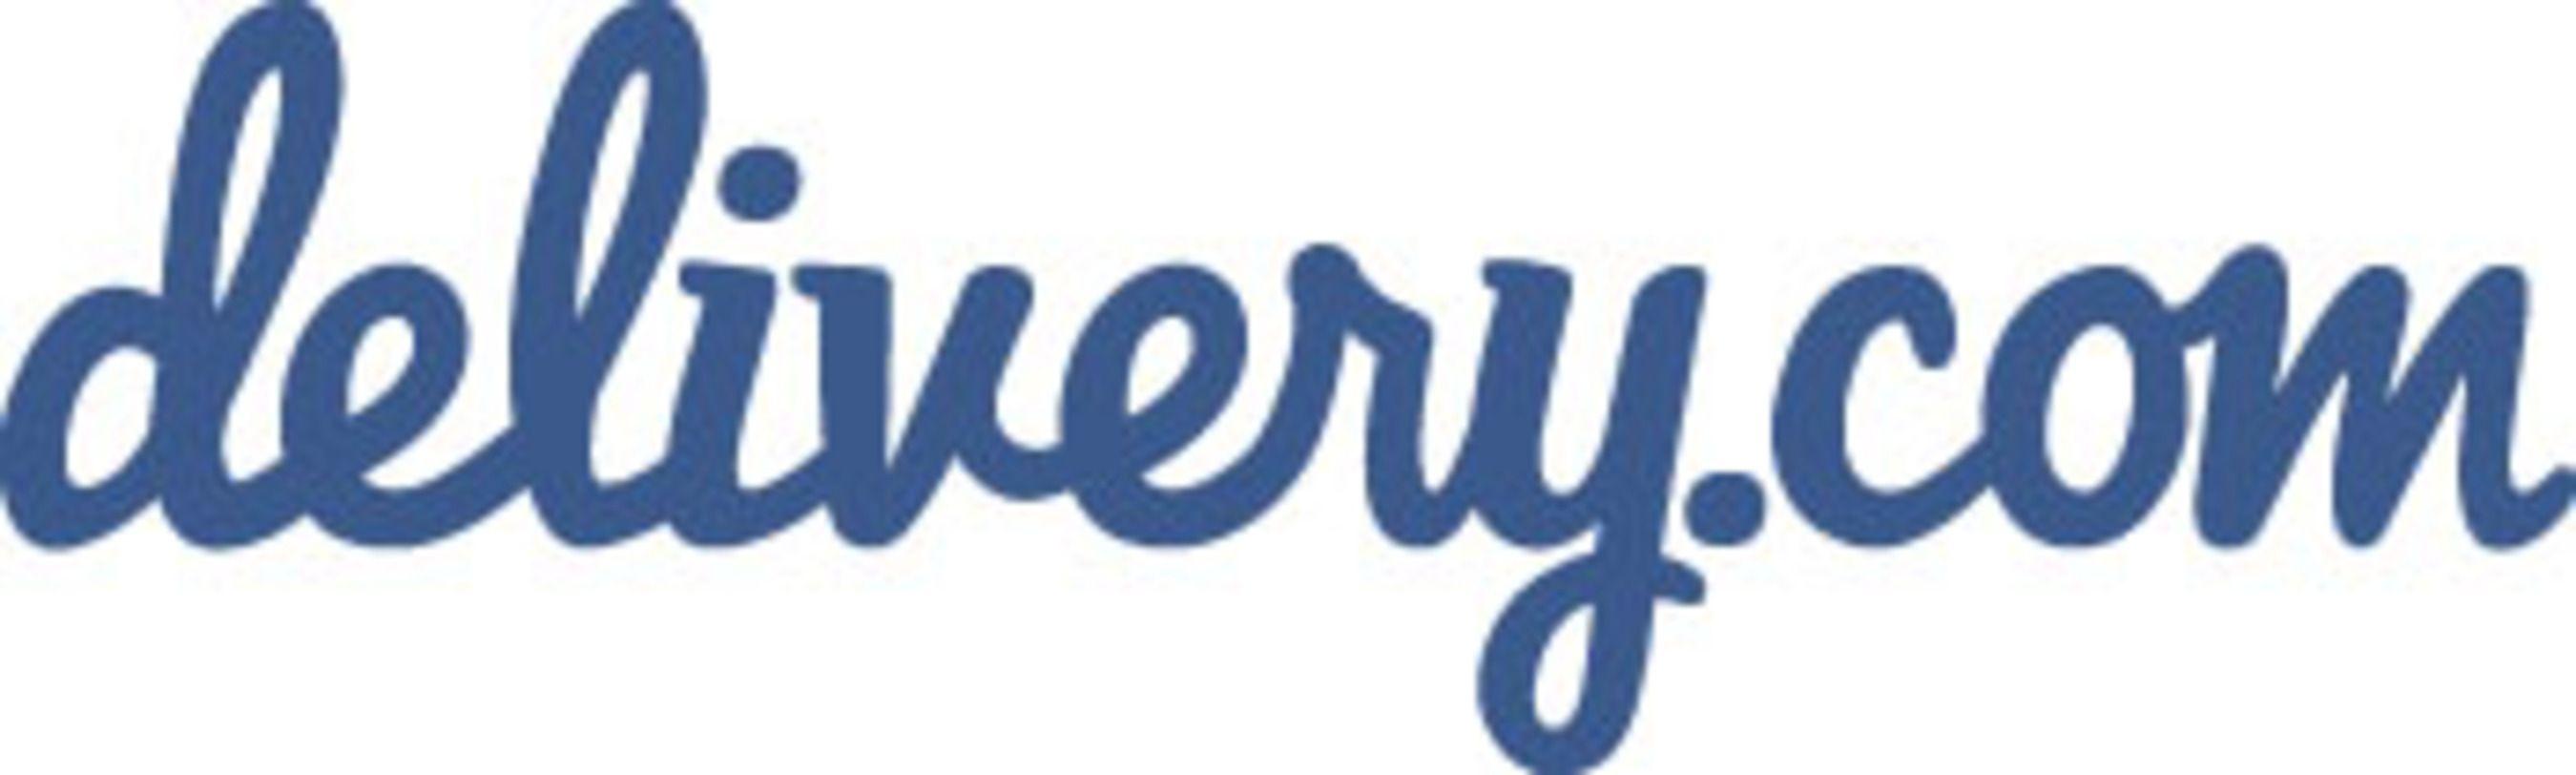 Official Foursquare Logo - delivery.com and Foursquare Integrate to Bridge the Gaps Between Apps